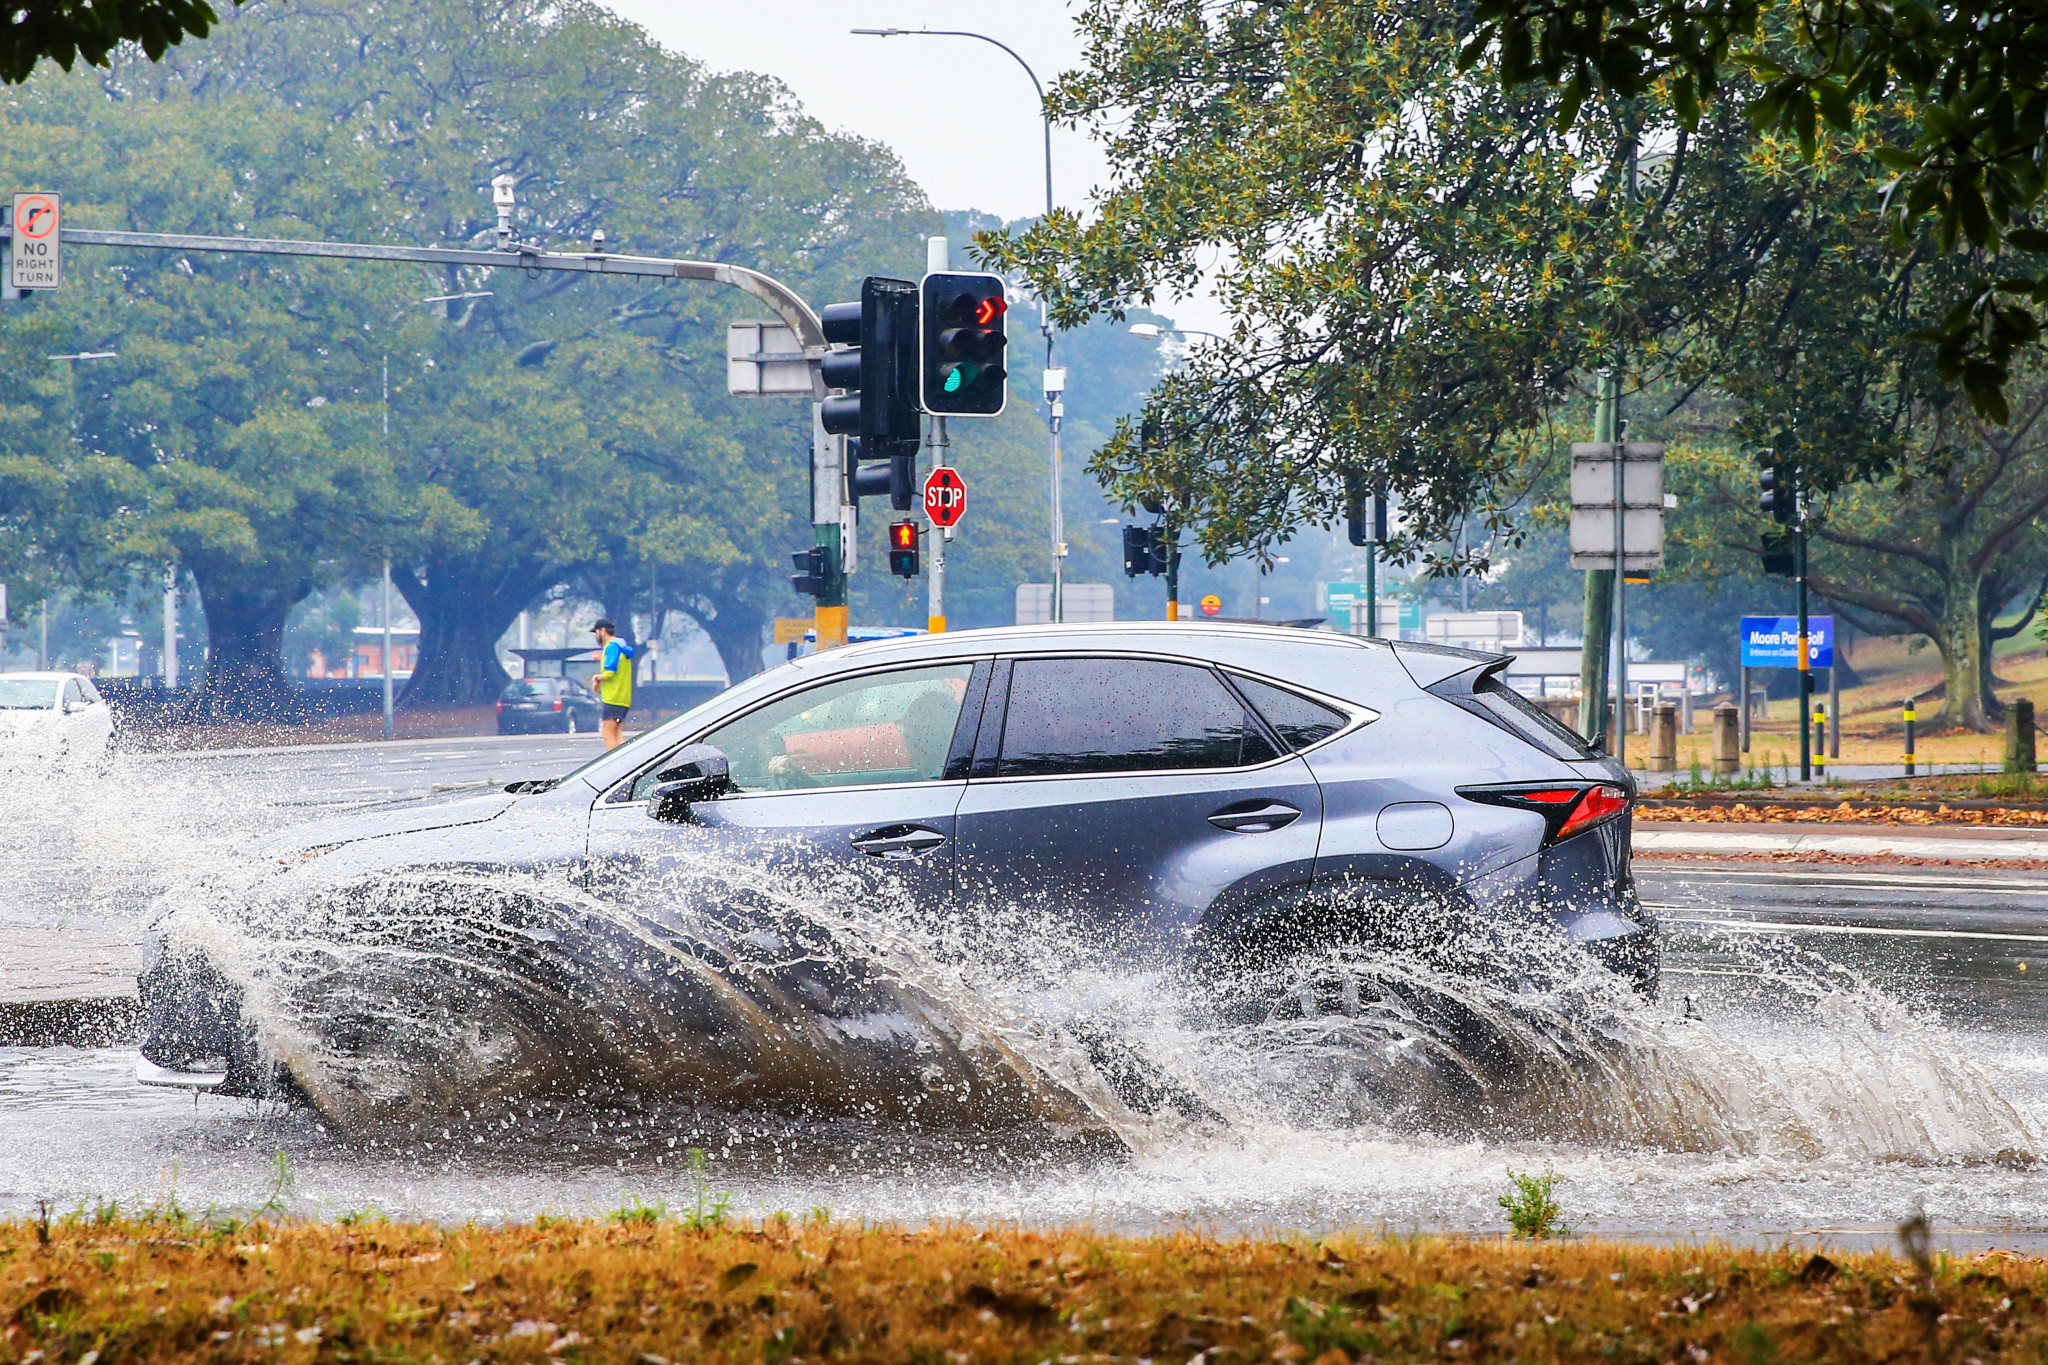 Remarkably, Sydney is now dealing with flooding ©Getty Images